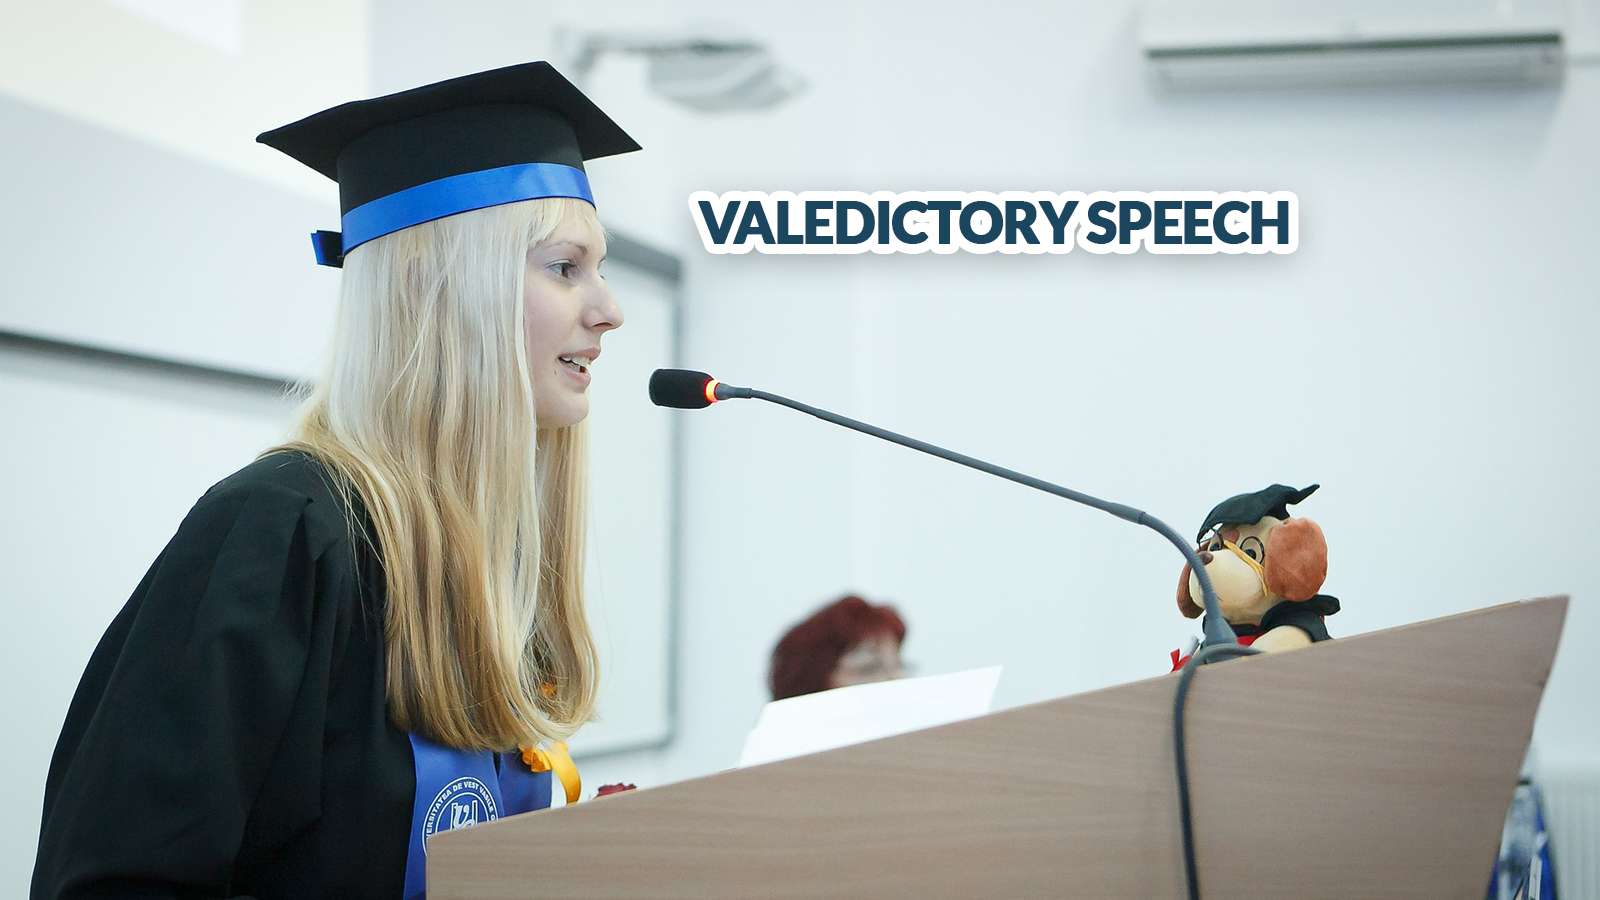 The Ultimate Guide to Delivering a Heartfelt Valedictory Speech